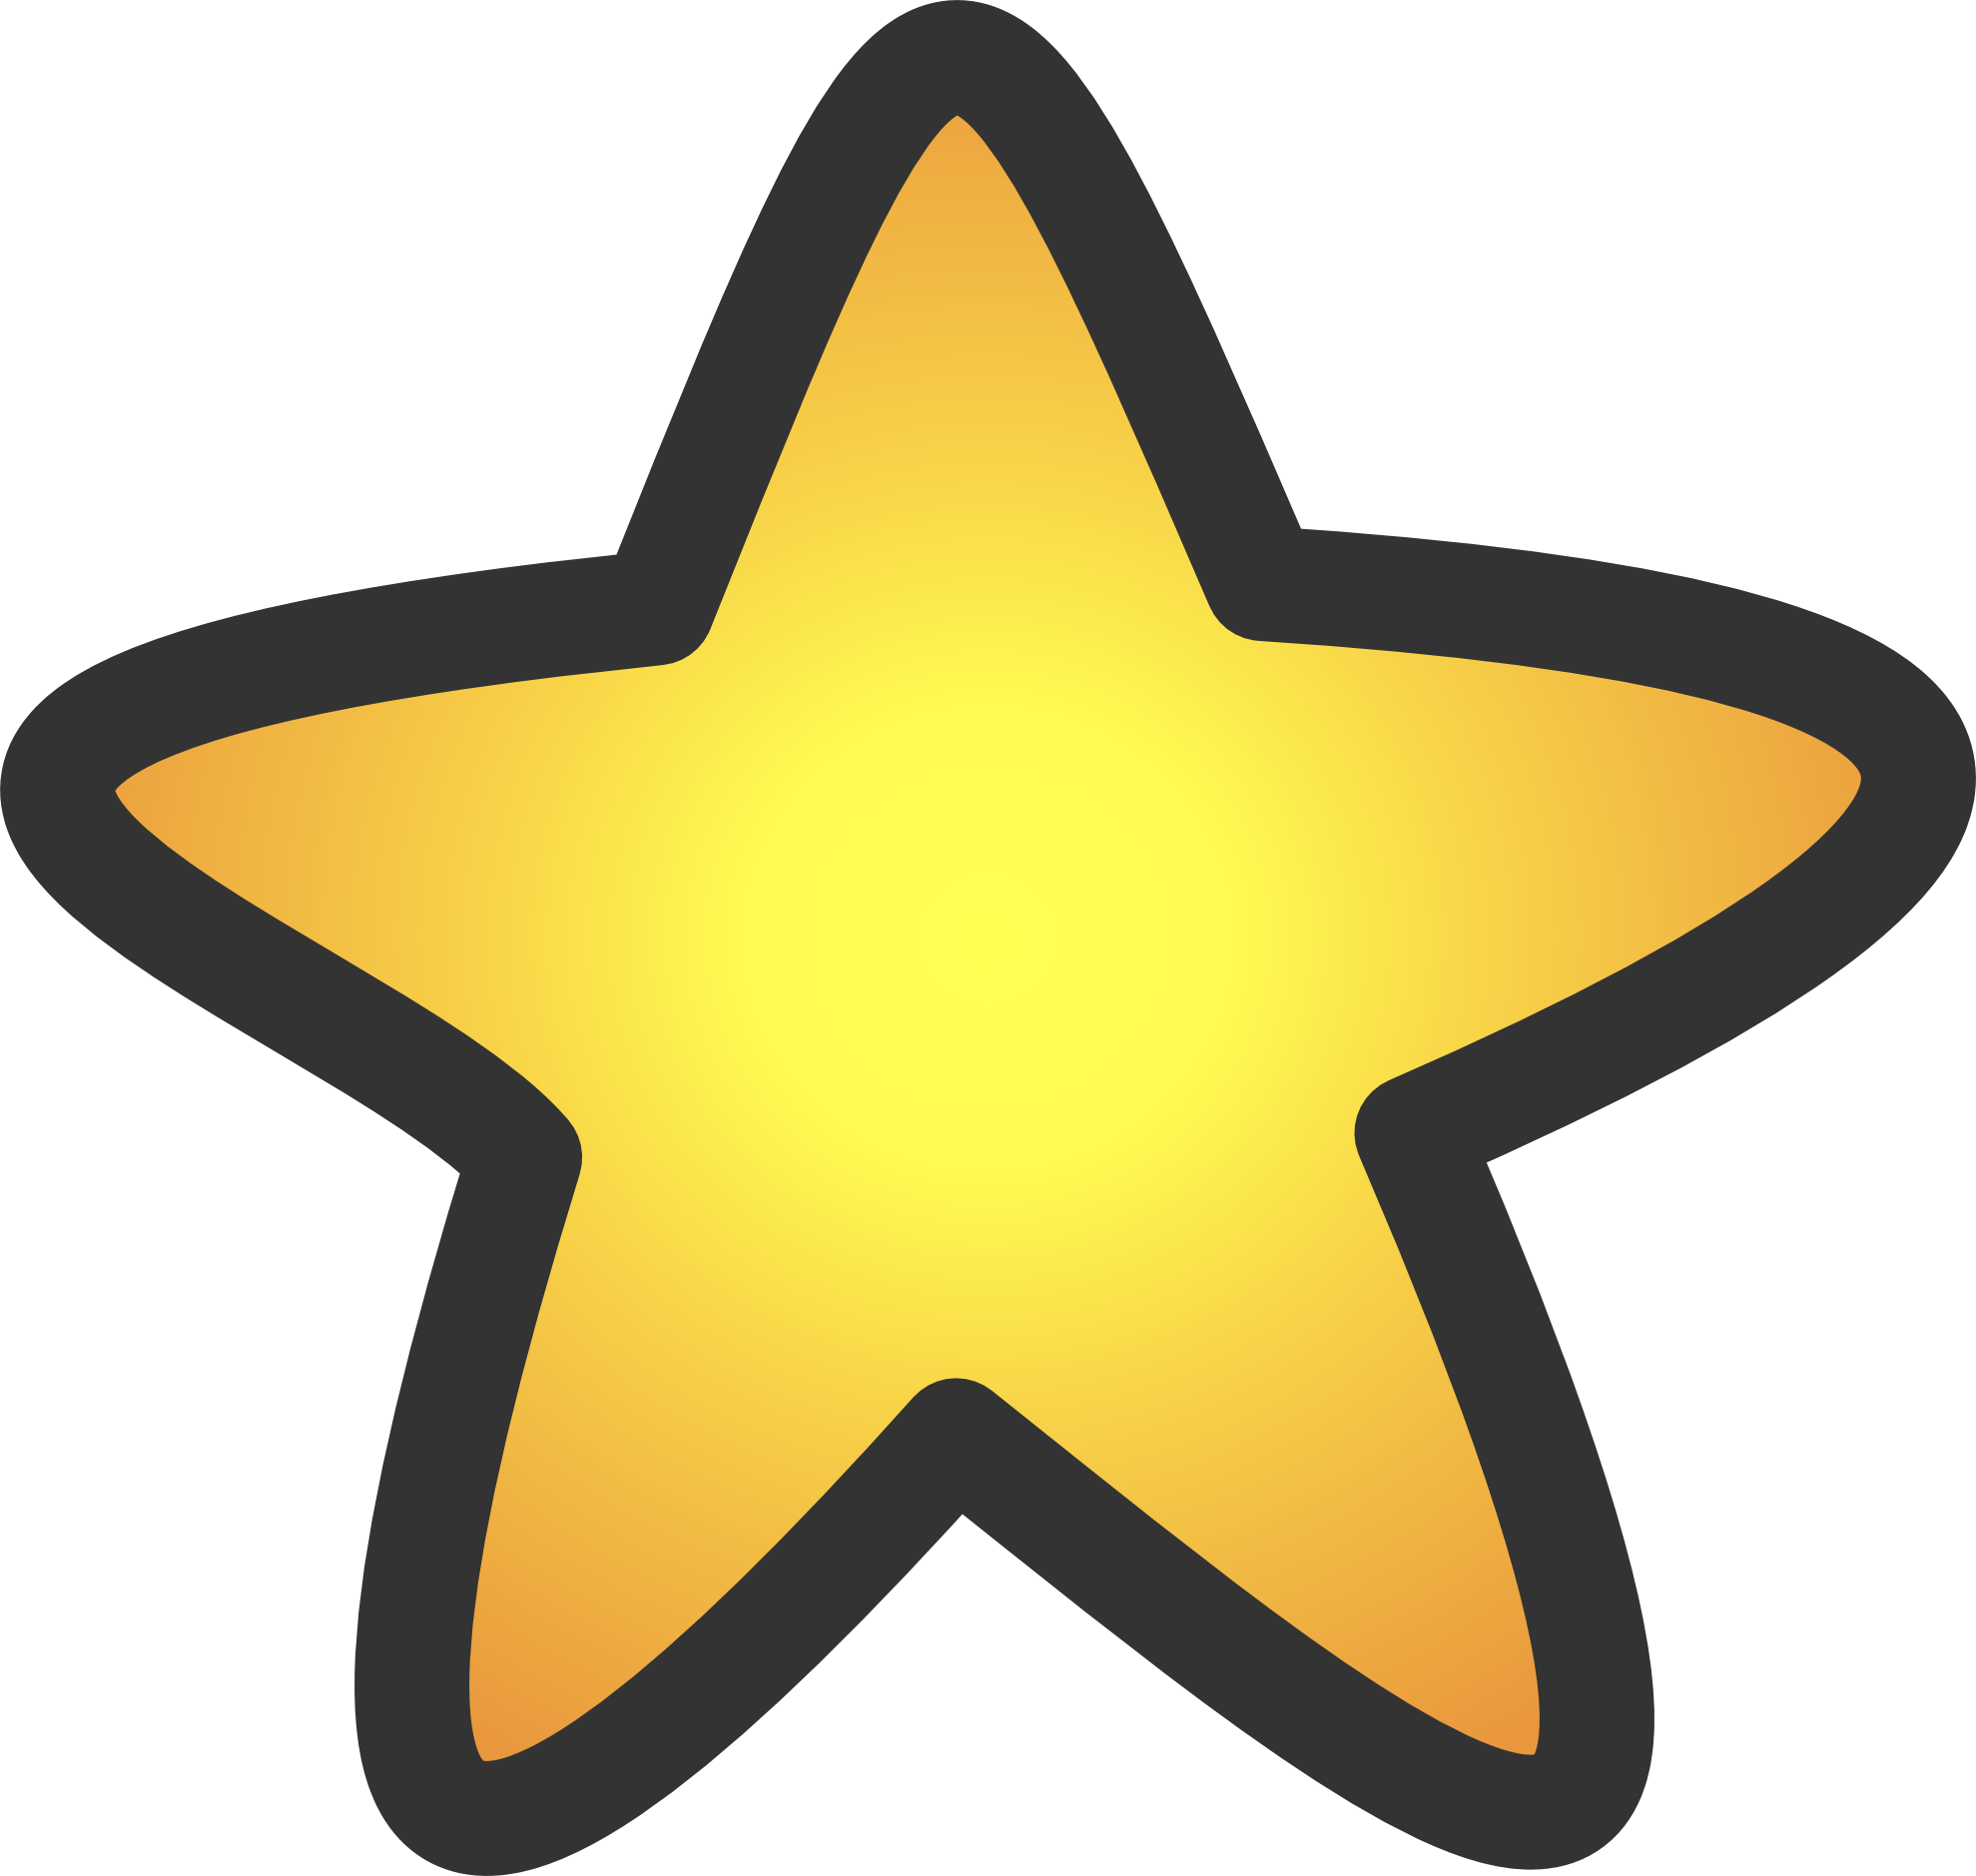 Gold Star Images - ClipArt Best